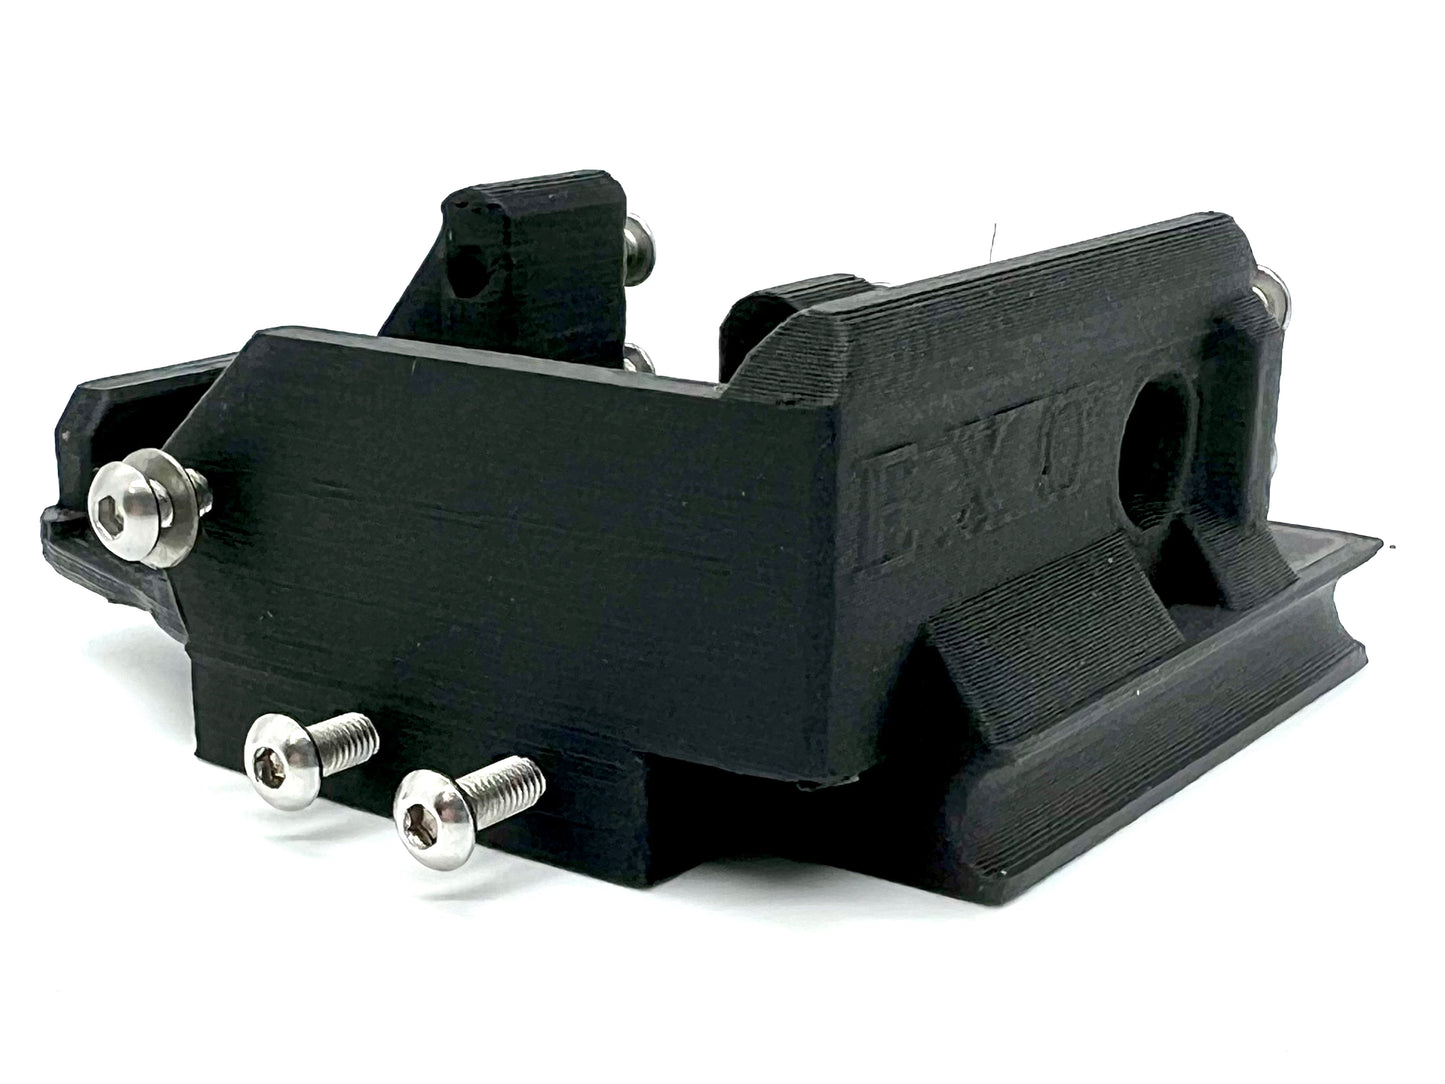 3D for VRD Winch Battery Mount up to 850mah 3s or 650mah 4s